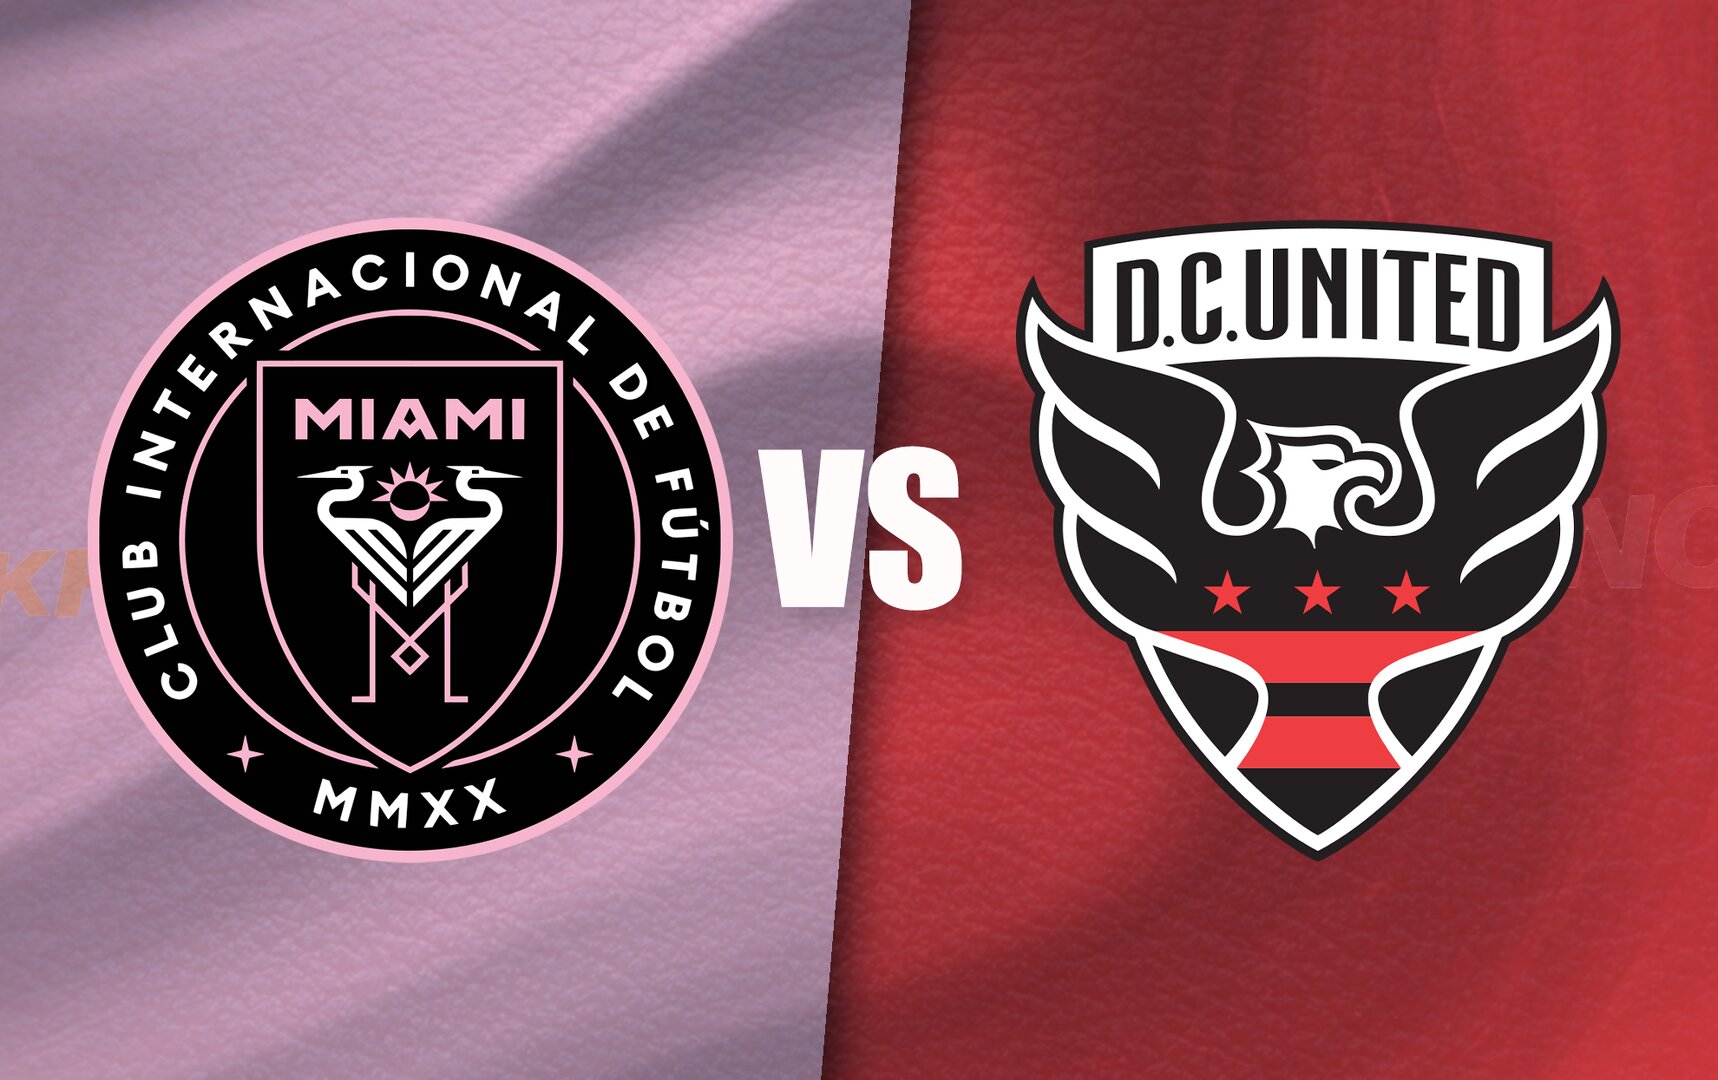 Inter Miami vs DC United Predicted lineup, betting tips, odds, injury